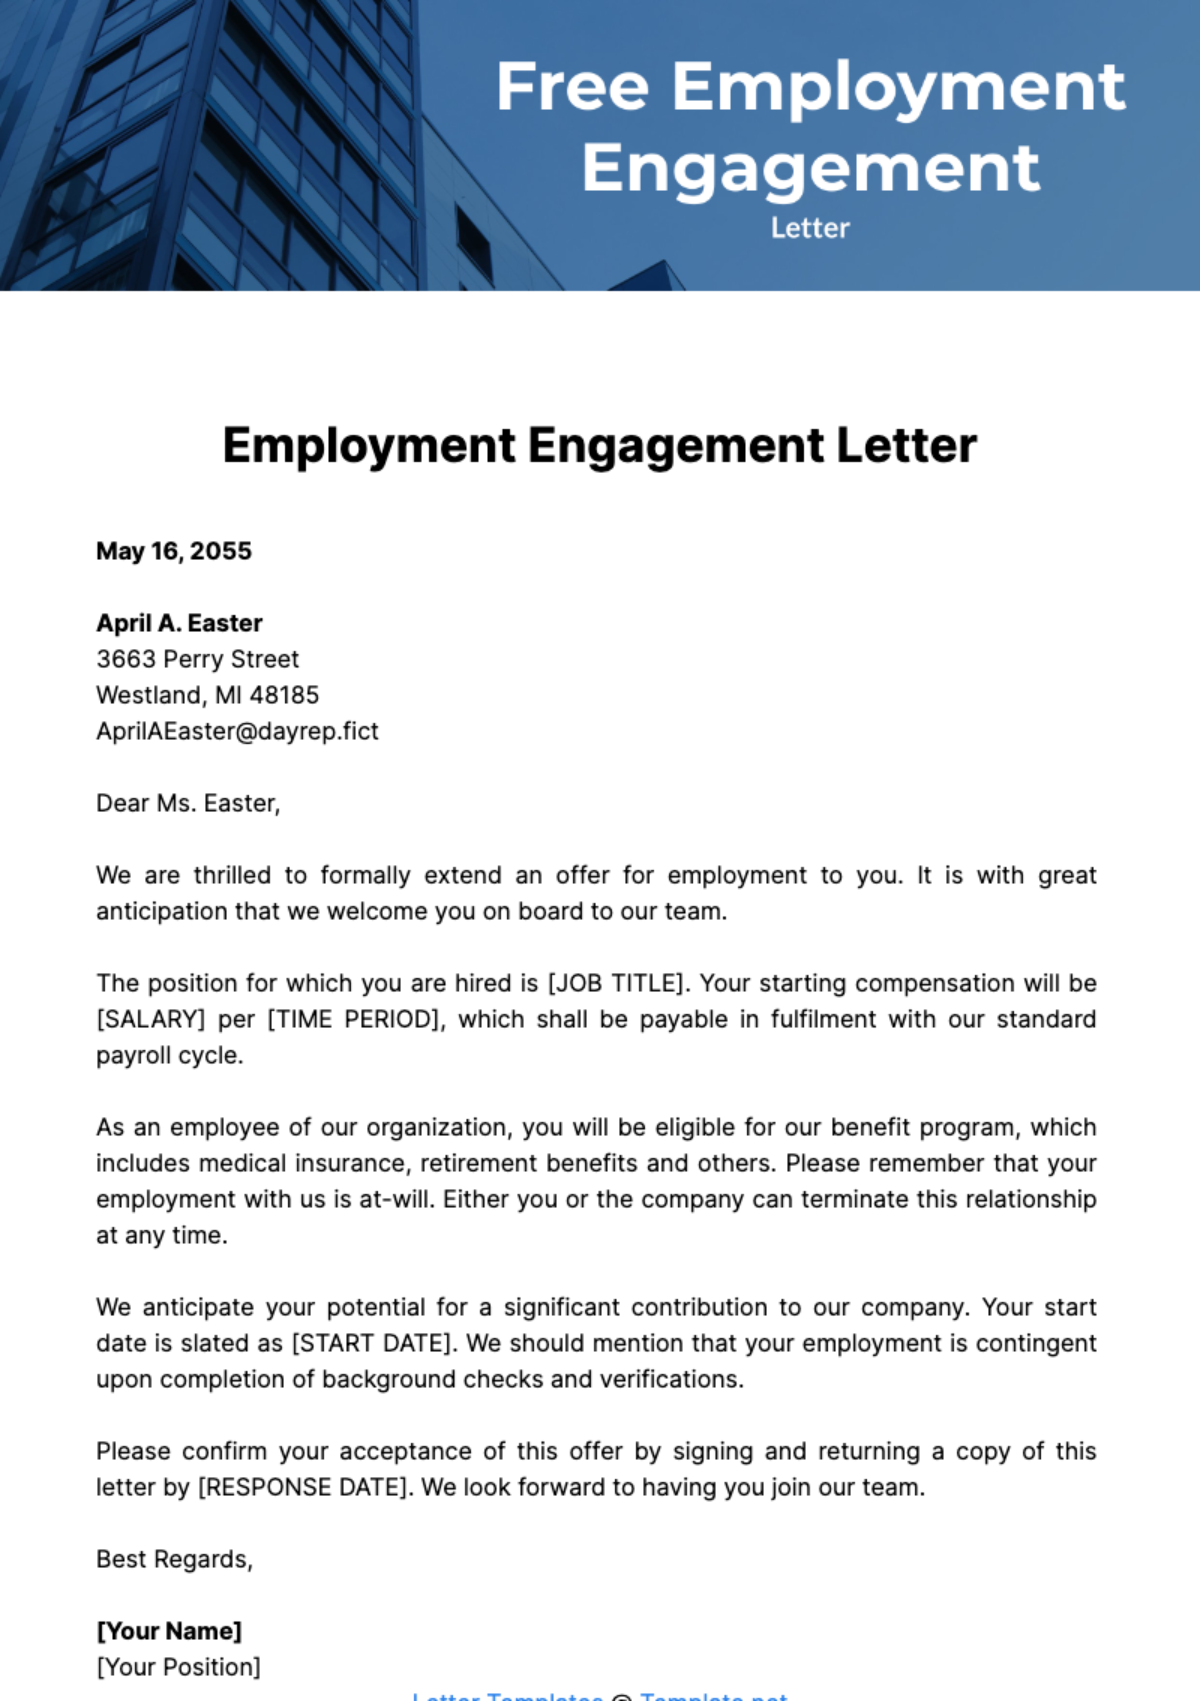 Free Employment Engagement Letter Template